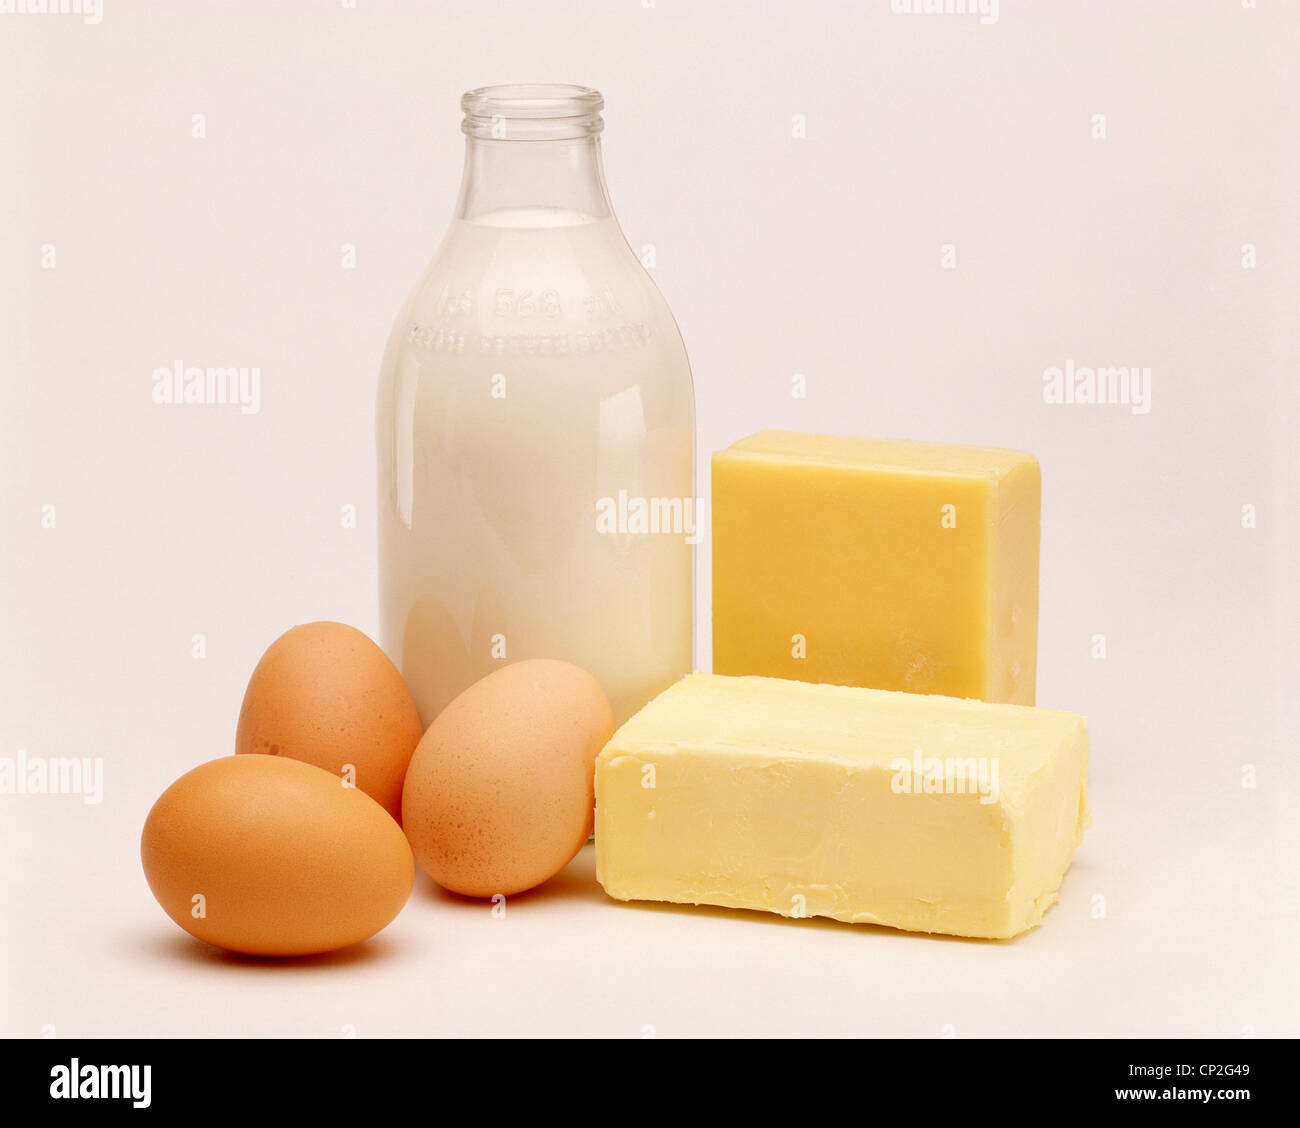 Eggs, milk, butter and cheese, dairy food selection, London, England, United Kingdom Stock Photo